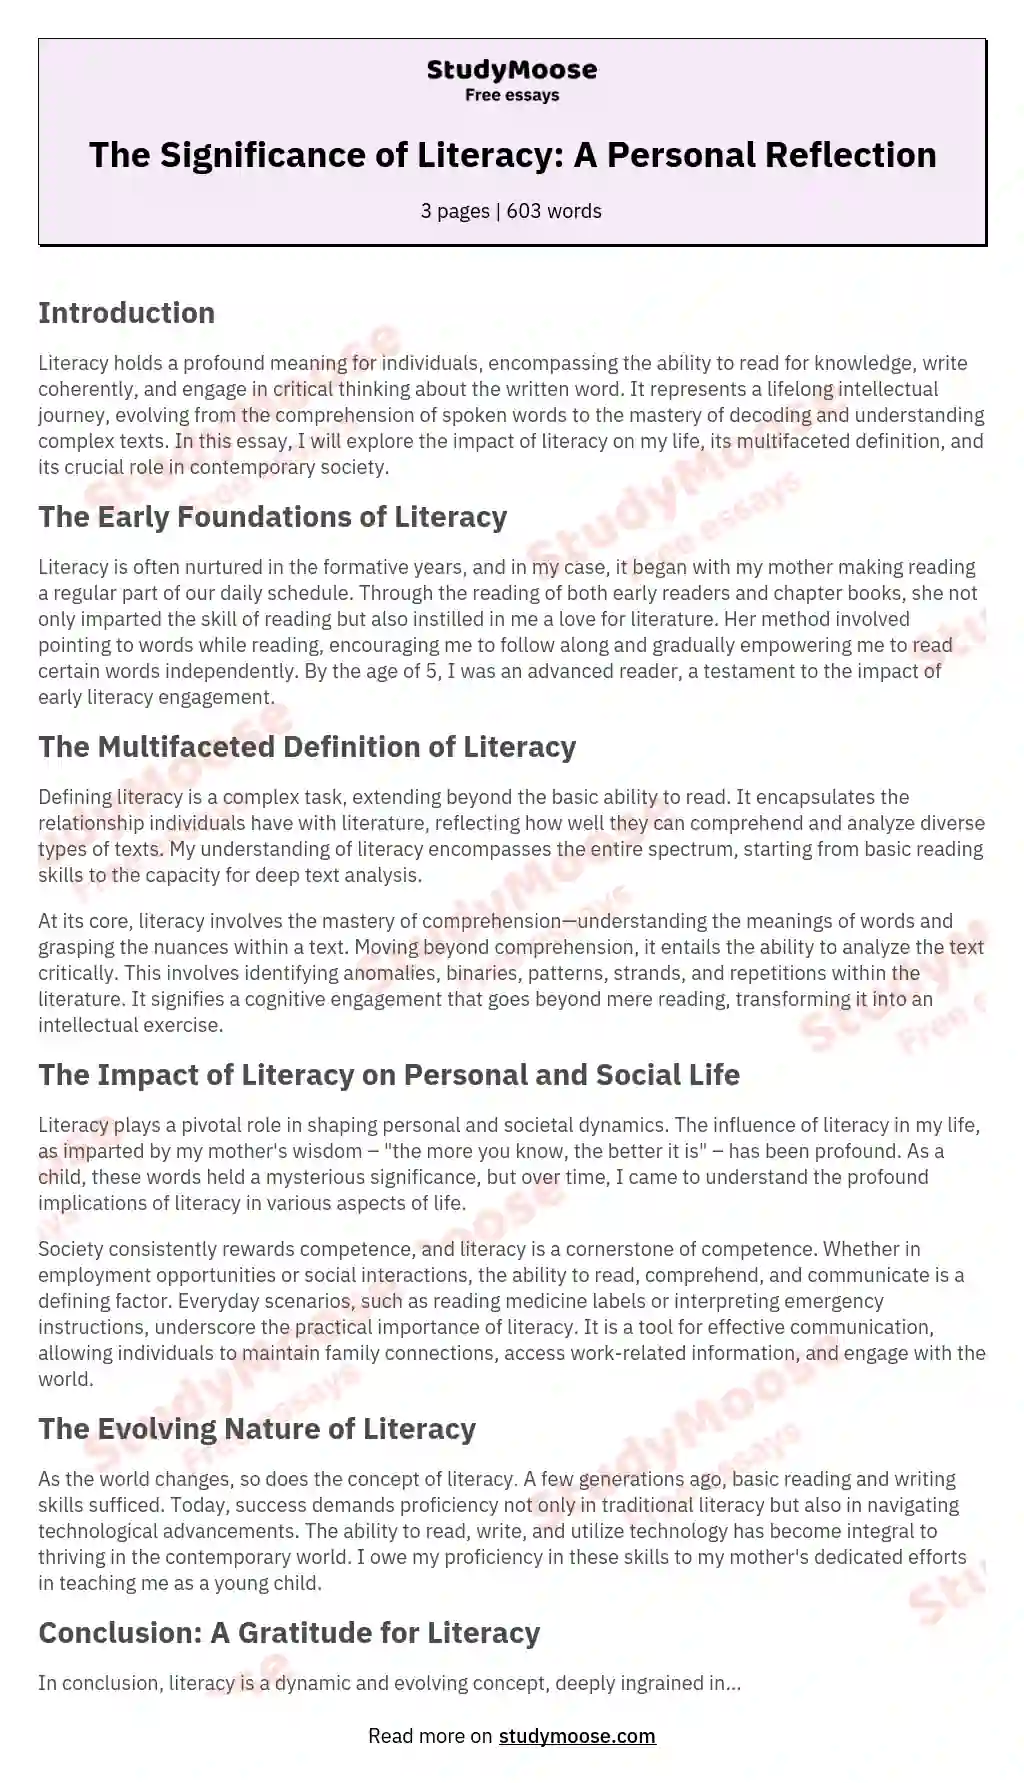 The Significance of Literacy: A Personal Reflection essay